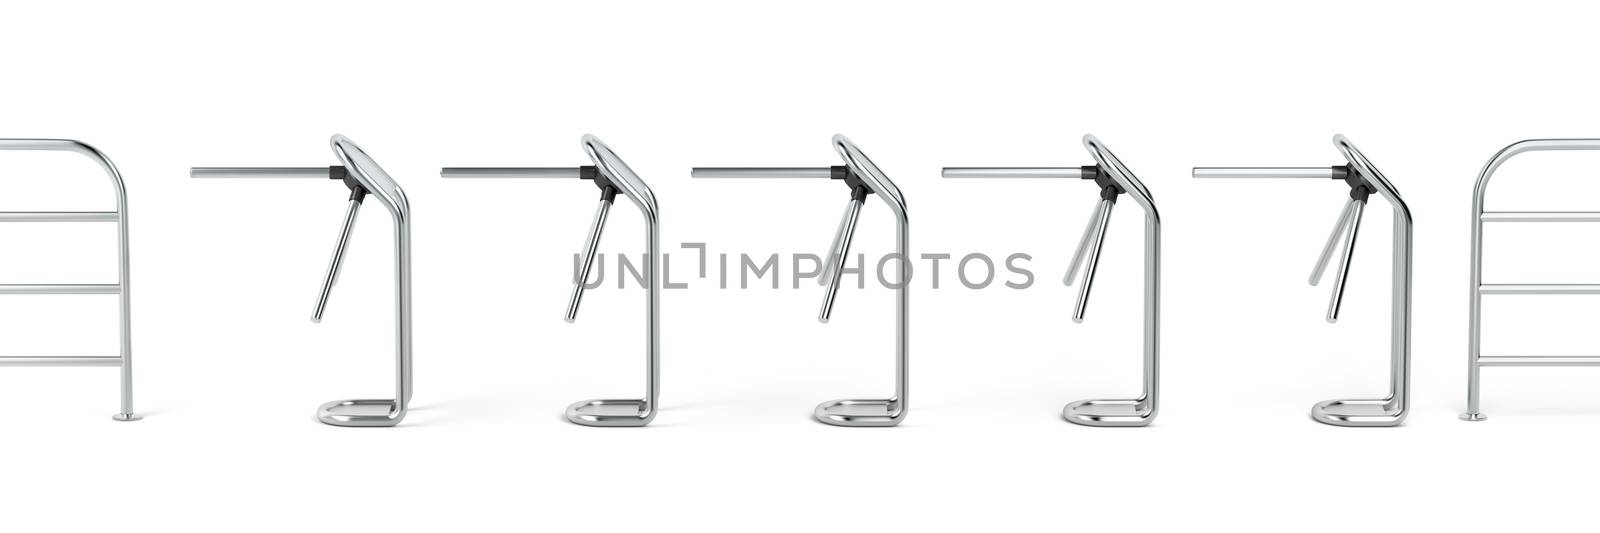 Row with silver turnstiles by magraphics